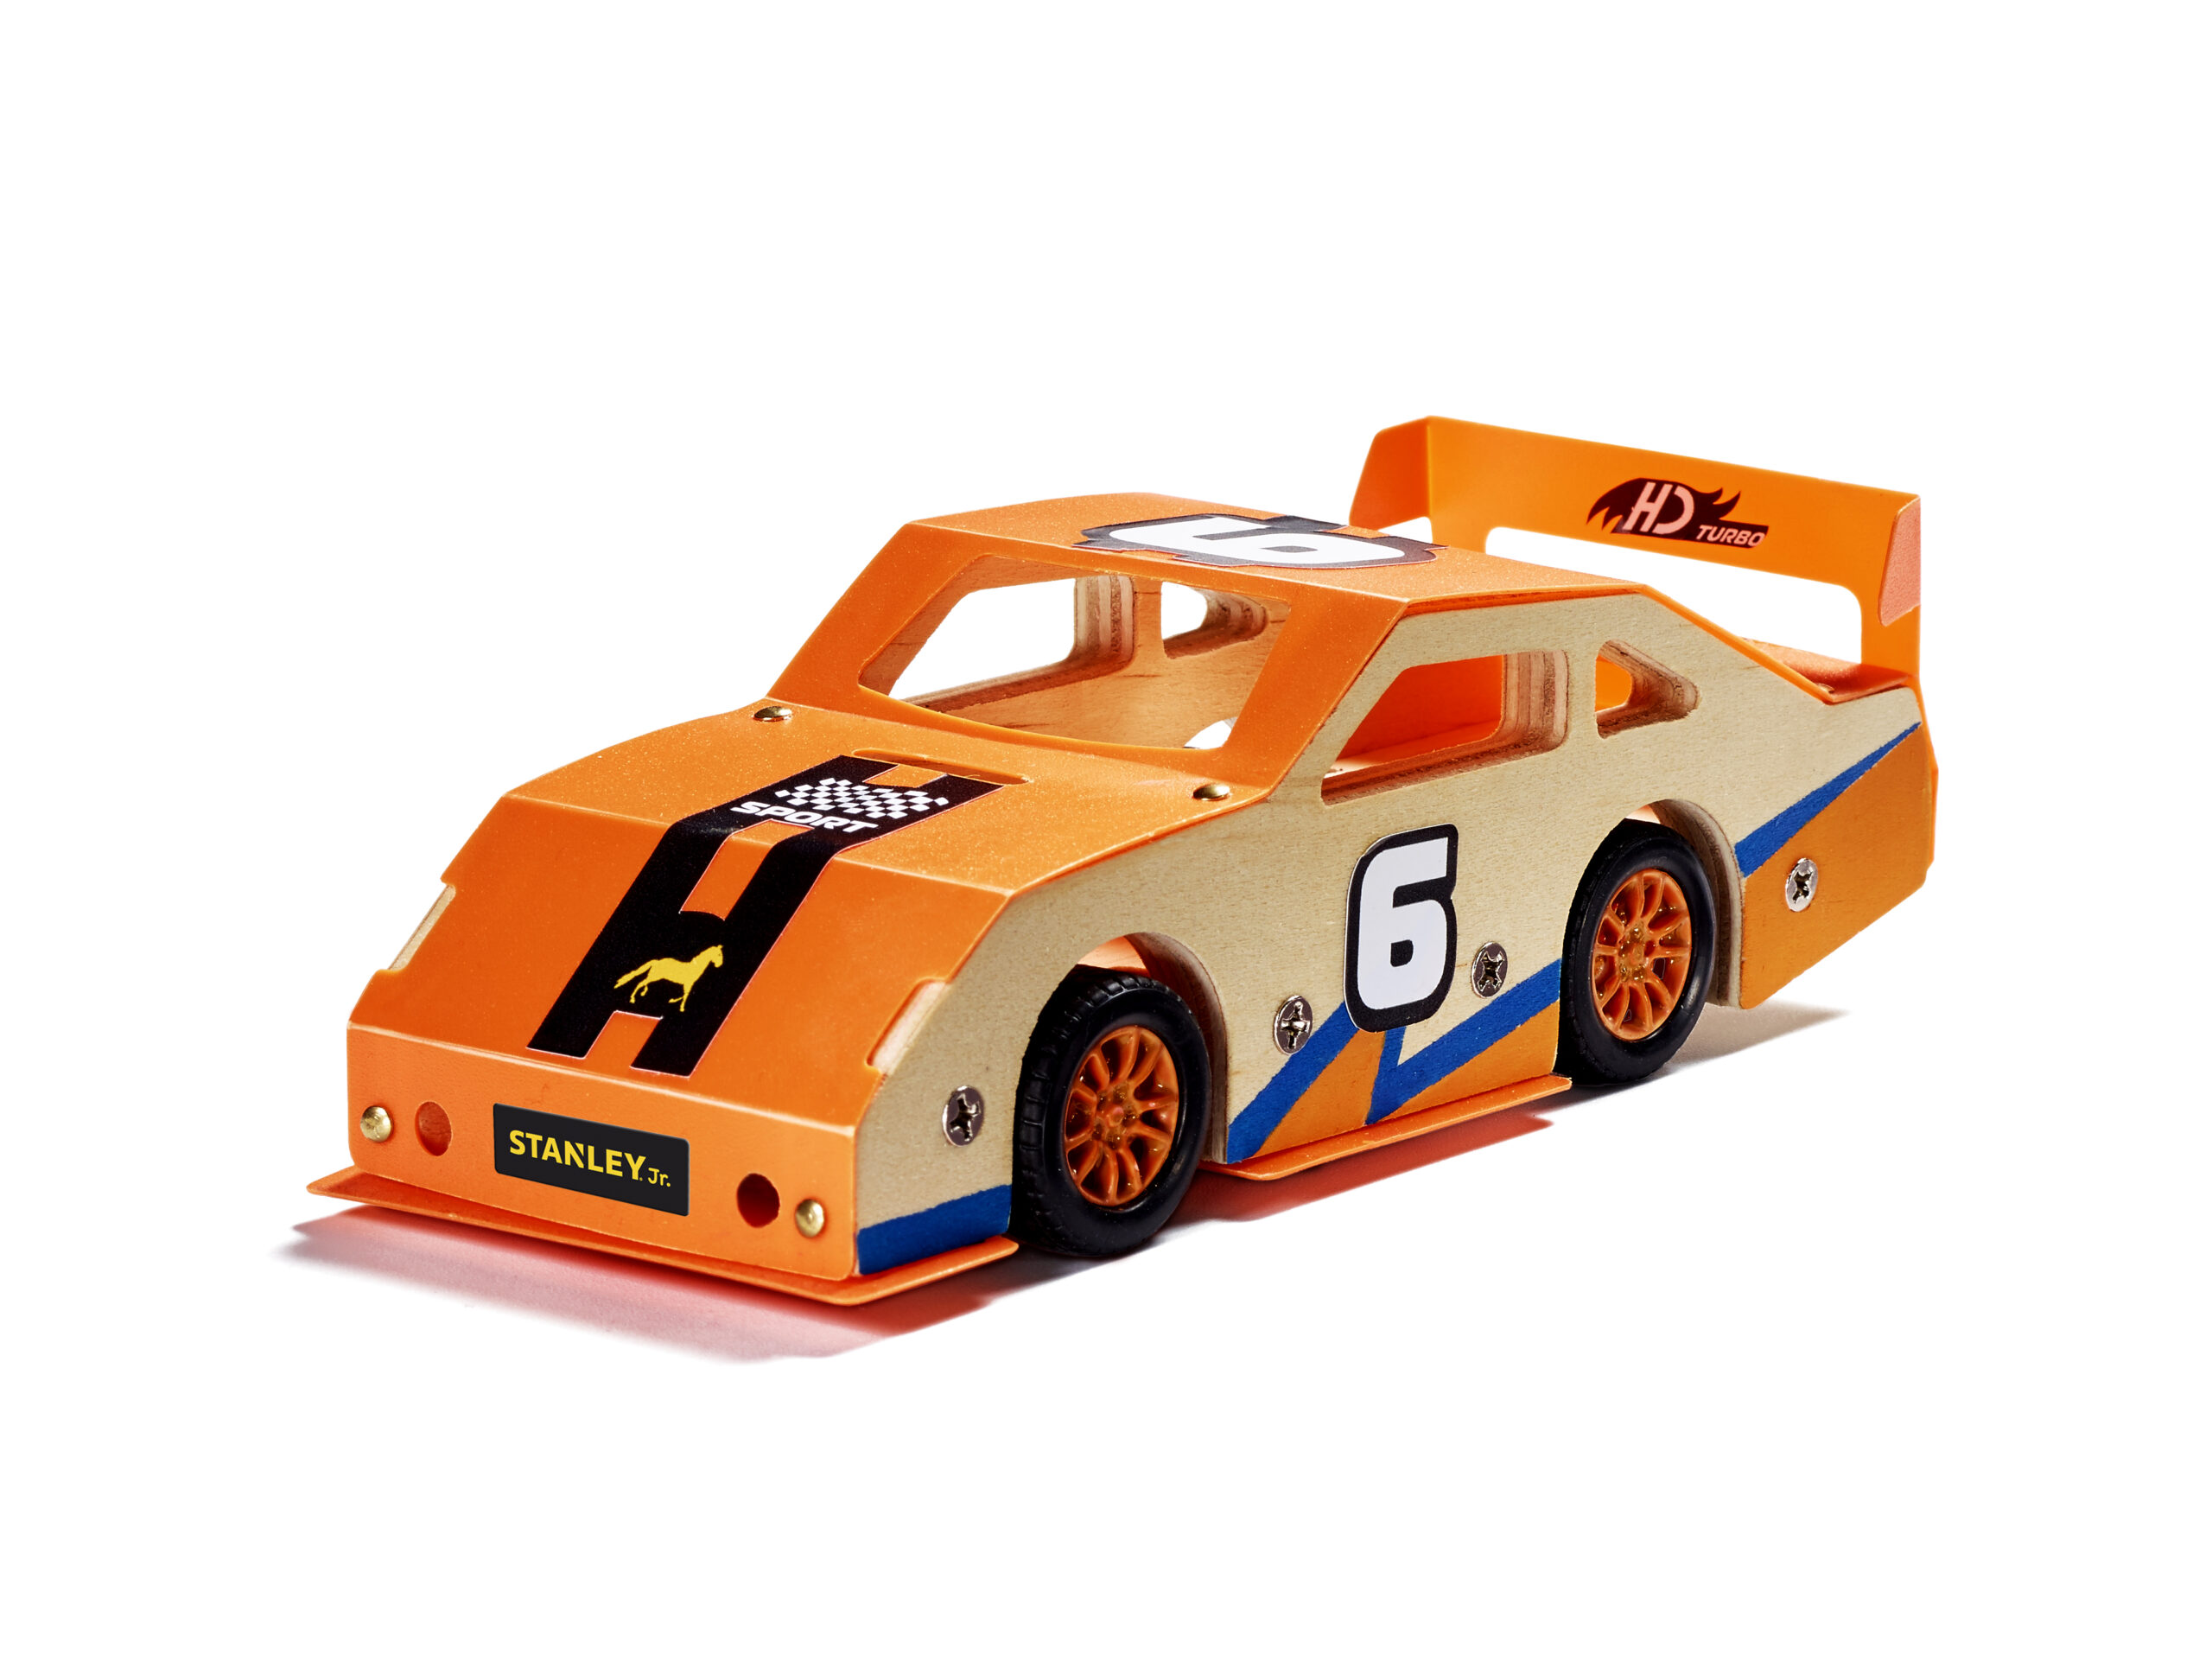 4 DIY Wooden Race Cars-Build & Paint Your Own Wood Craft Kit Gifts.